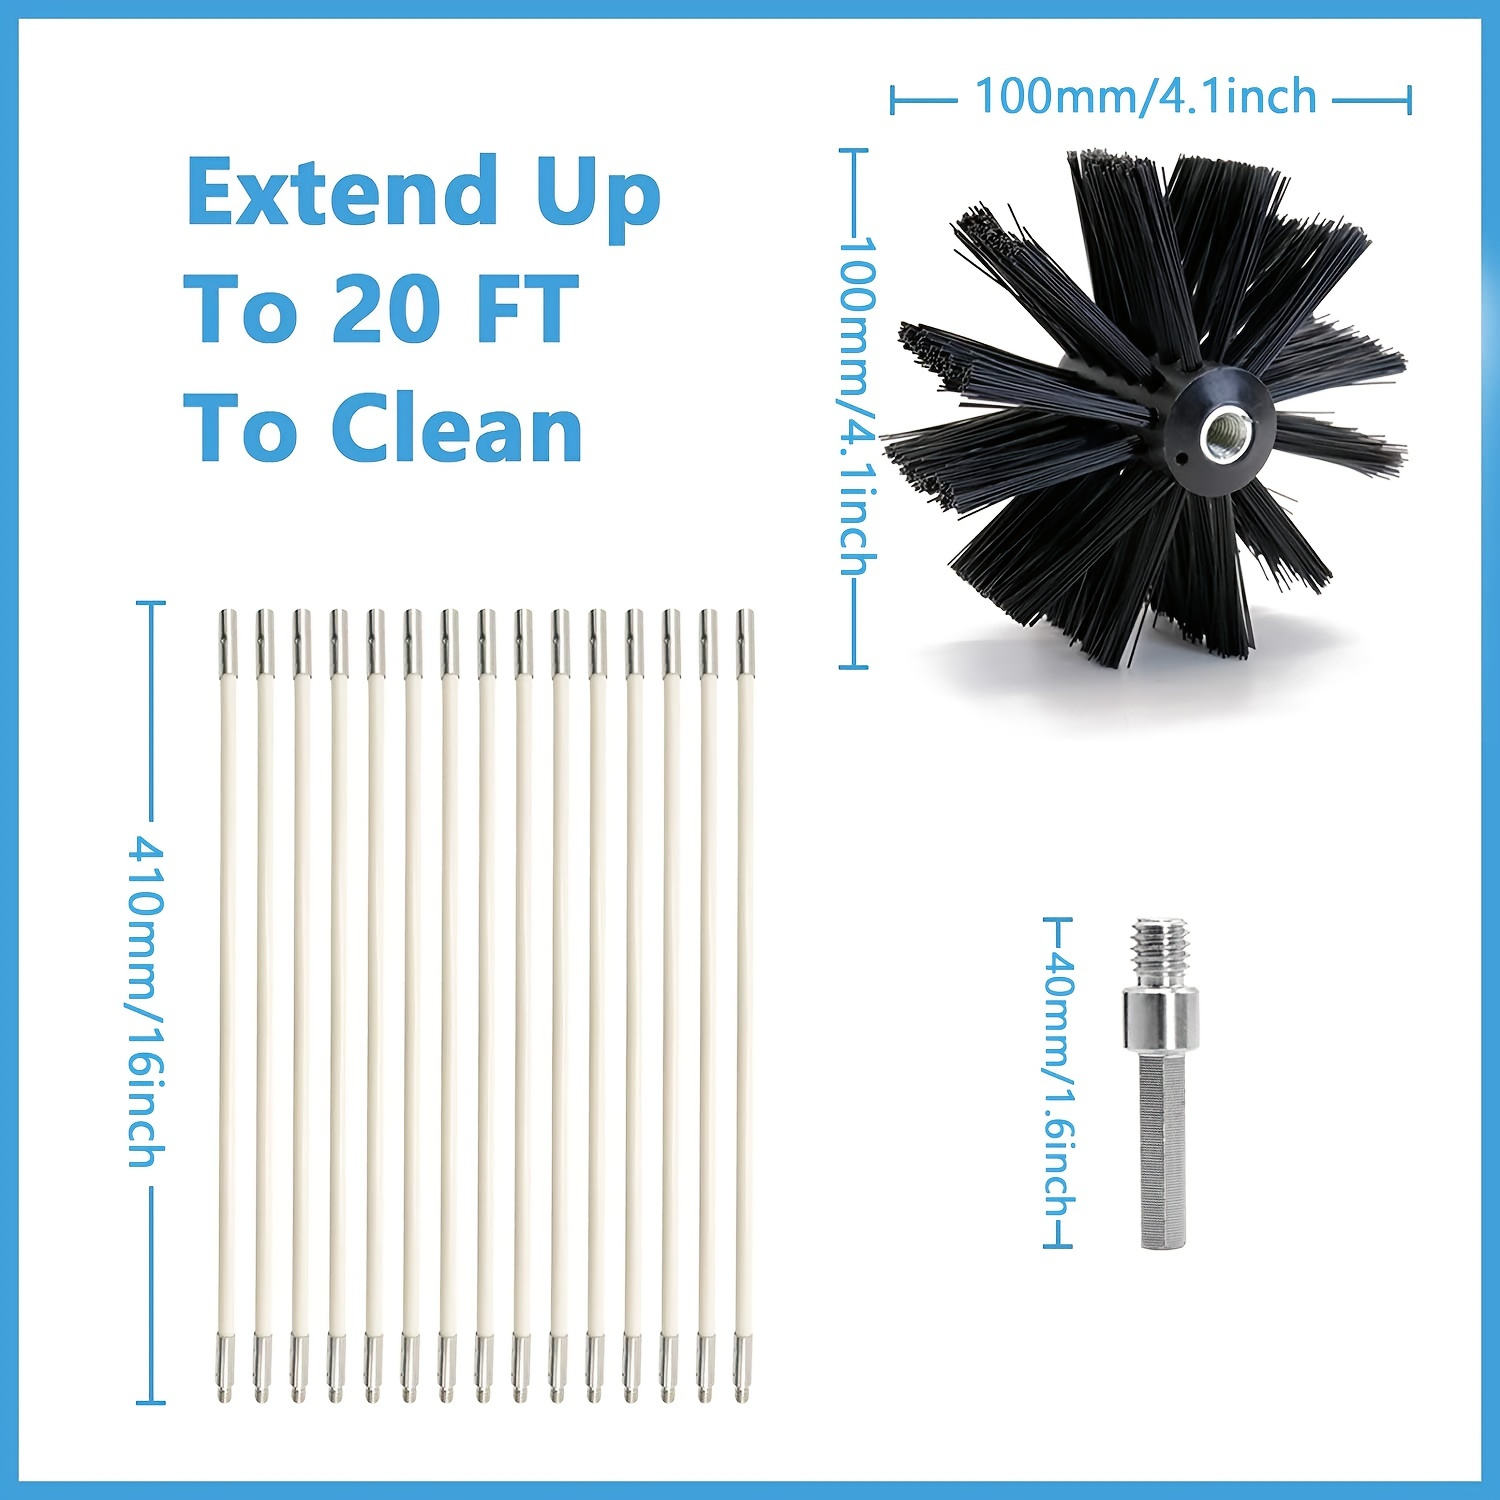 Dryer Duct Cleaning Kit Dryer Lint Remover Brush Sweep Kit, Extends Up To  12 Feet, 9 Rods+1 Brush Head, Use With or Without Power Drill